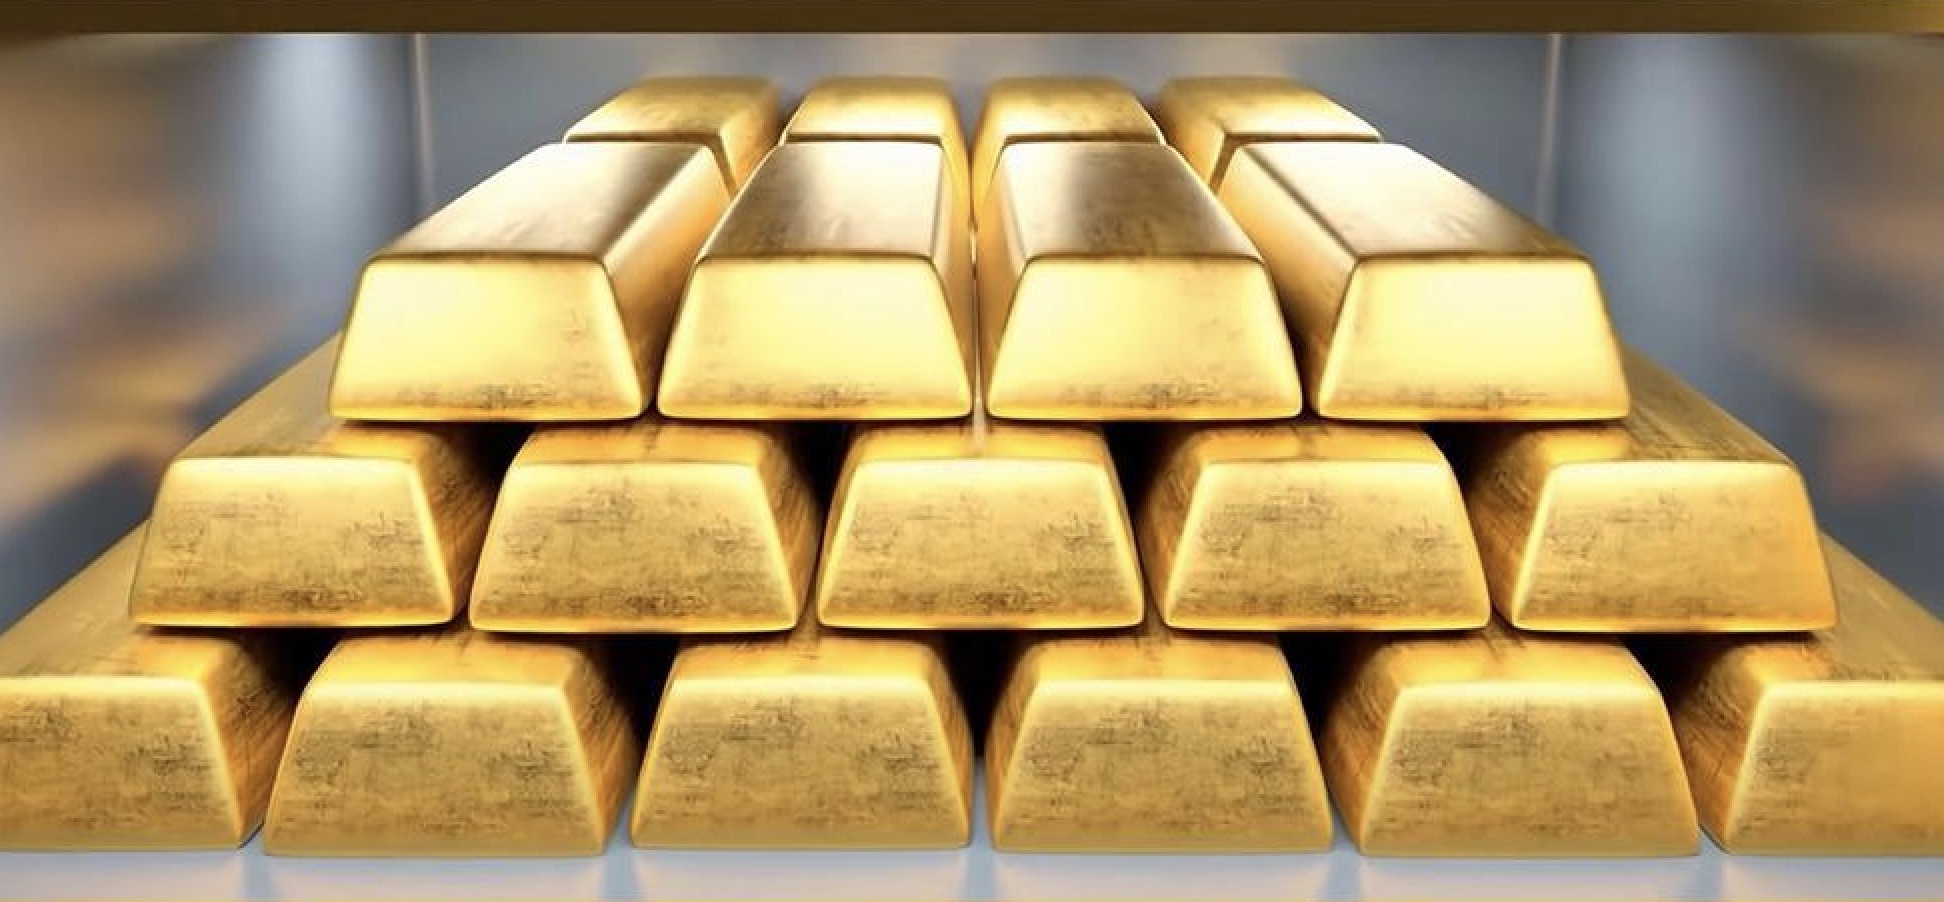 Countdown to Federal Reserve interest rate cut, experts predict gold rebound is expected, remind investors to follow the trend